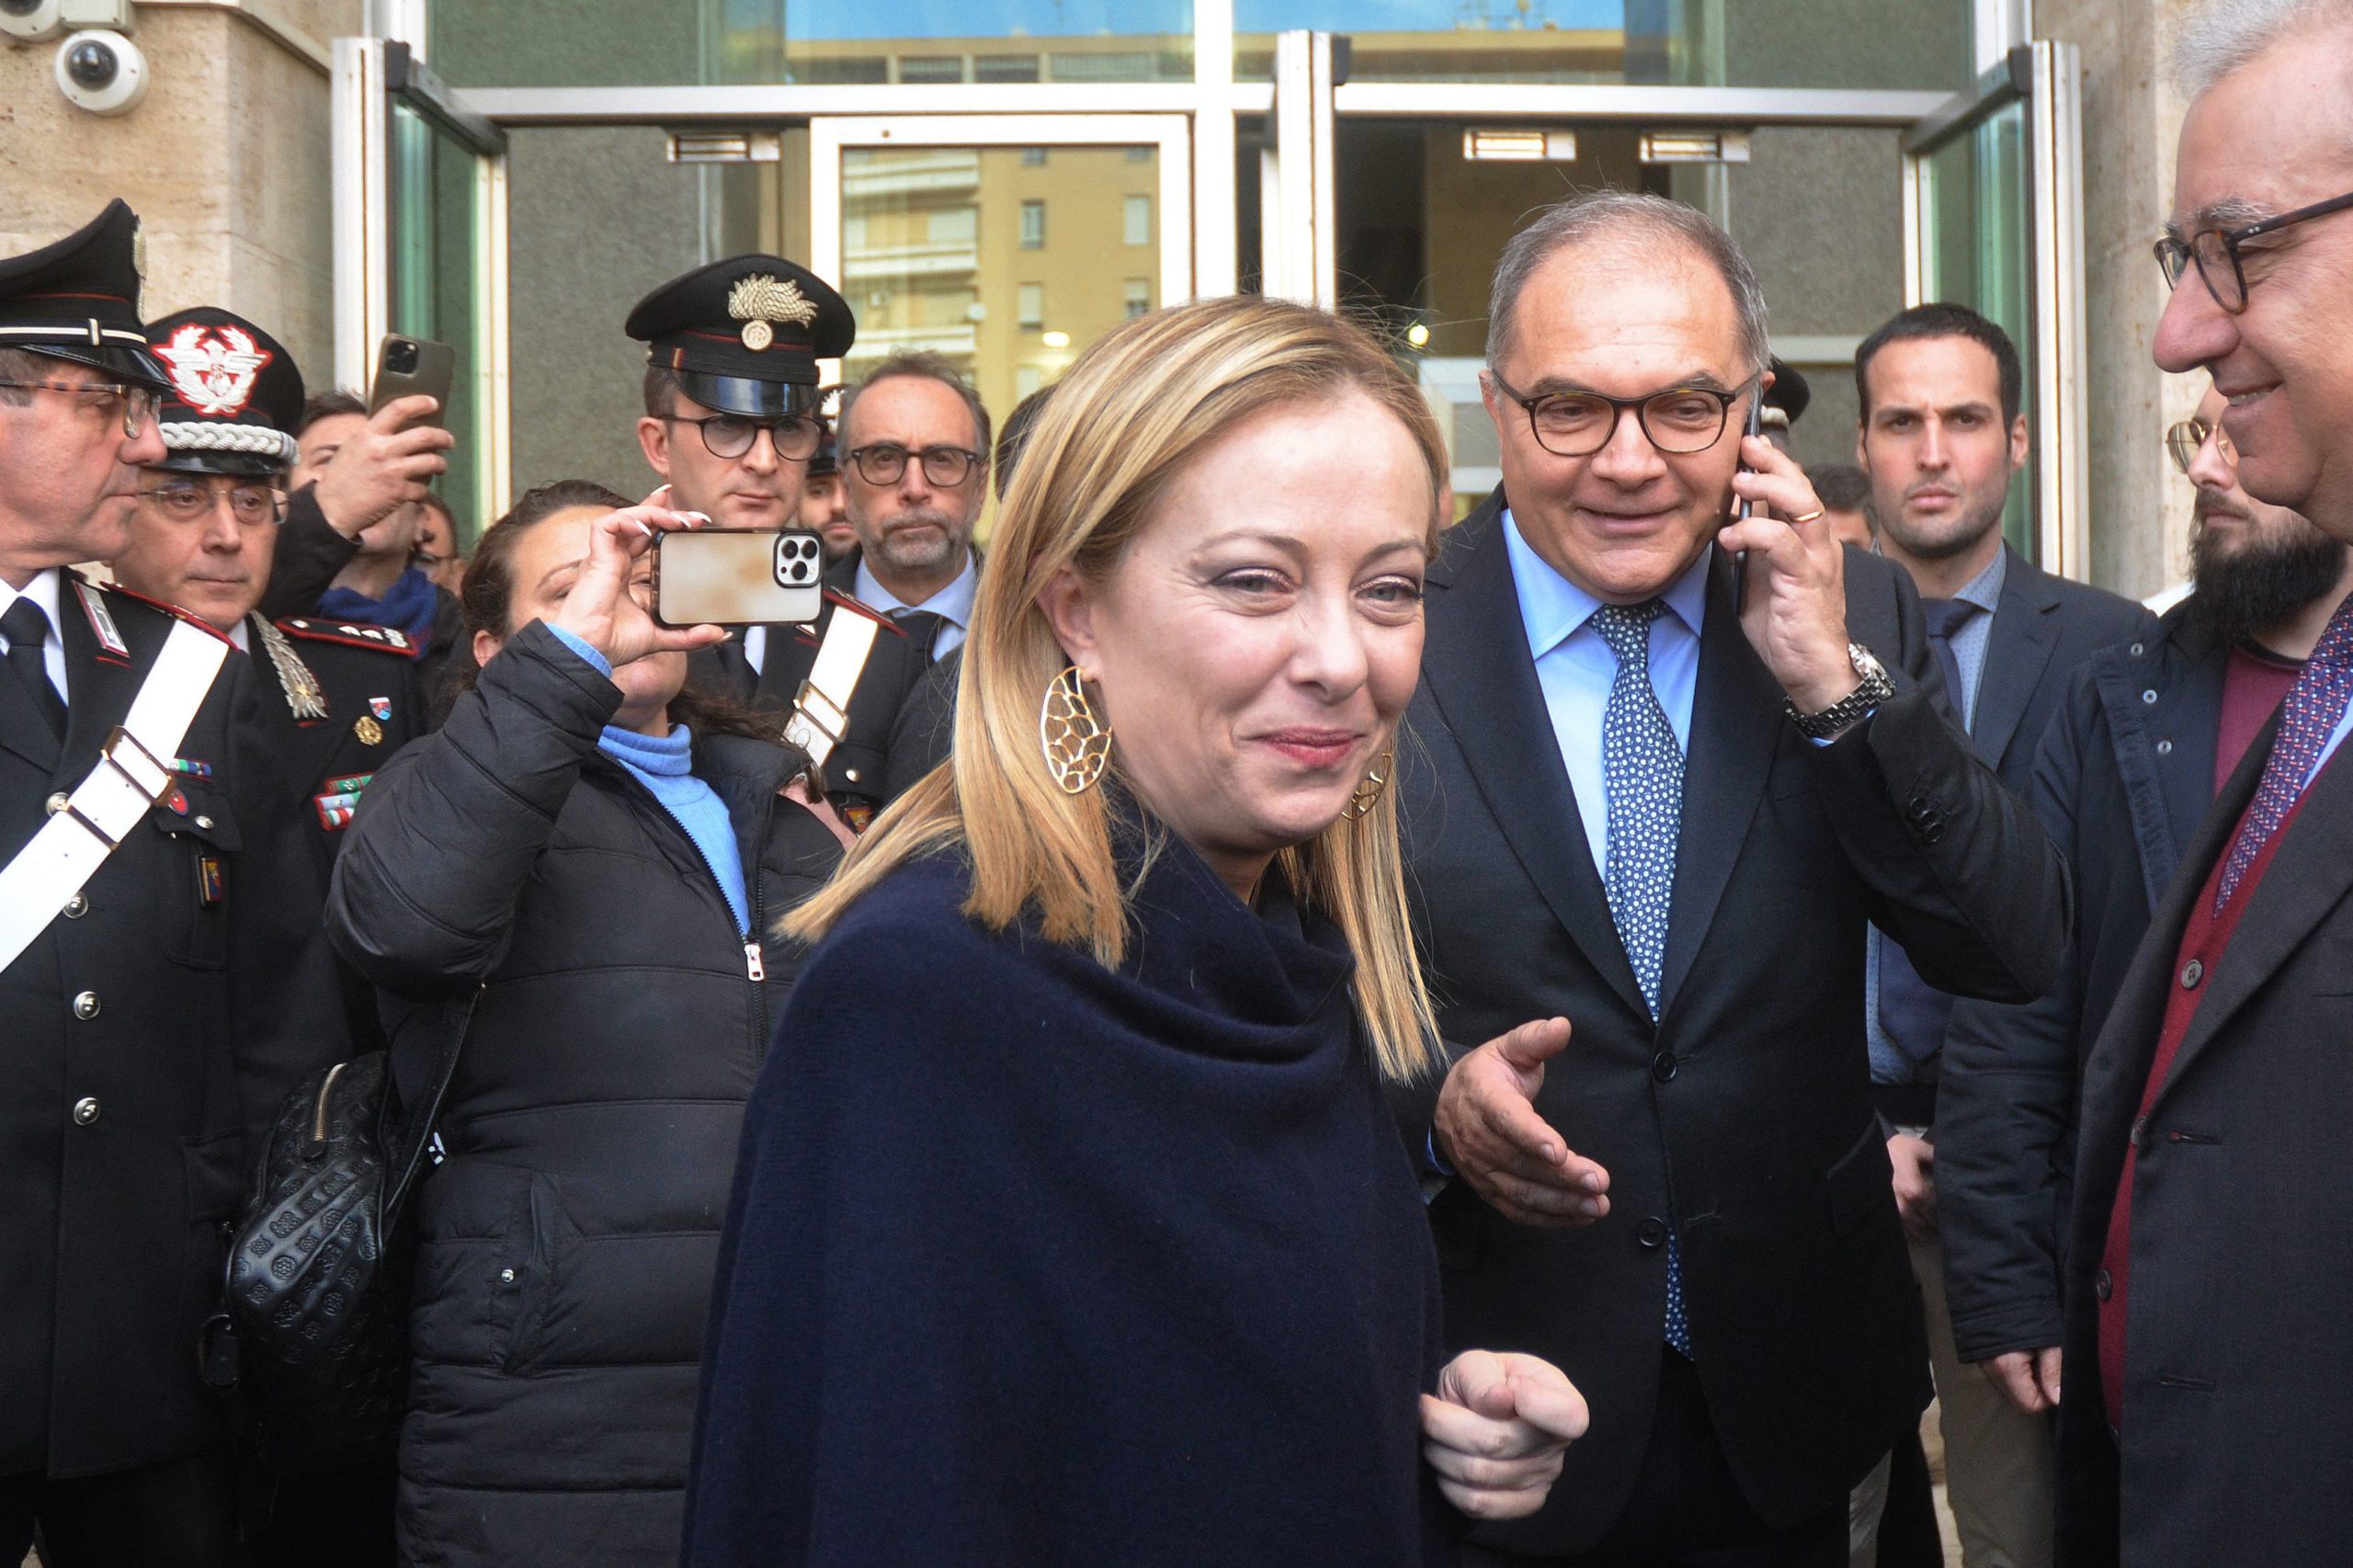 Italy's Prime minister Giorgia Meloni (C) and Palermo prosecutor Maurizio De Lucia (2nd R) arrive in Palermo to meet police officers after the arrest of the Italy's top wanted mafia boss, Matteo Messina Denaro in Palermo, on January 16, 2023. - Italian anti-mafia police caught Sicilian godfather Matteo Messina Denaro on January 16, 2023, ending a 30-year manhunt for Italy's most wanted fugitive. The mobster was nabbed "inside a health facility in Palermo, where he had gone for therapeutic treatment", special operations commander Pasquale Angelosanto said in a statement released by the police. (Photo by Alessandro FUCARINI / AFP) (Photo by ALESSANDRO FUCARINI/AFP via Getty Images)